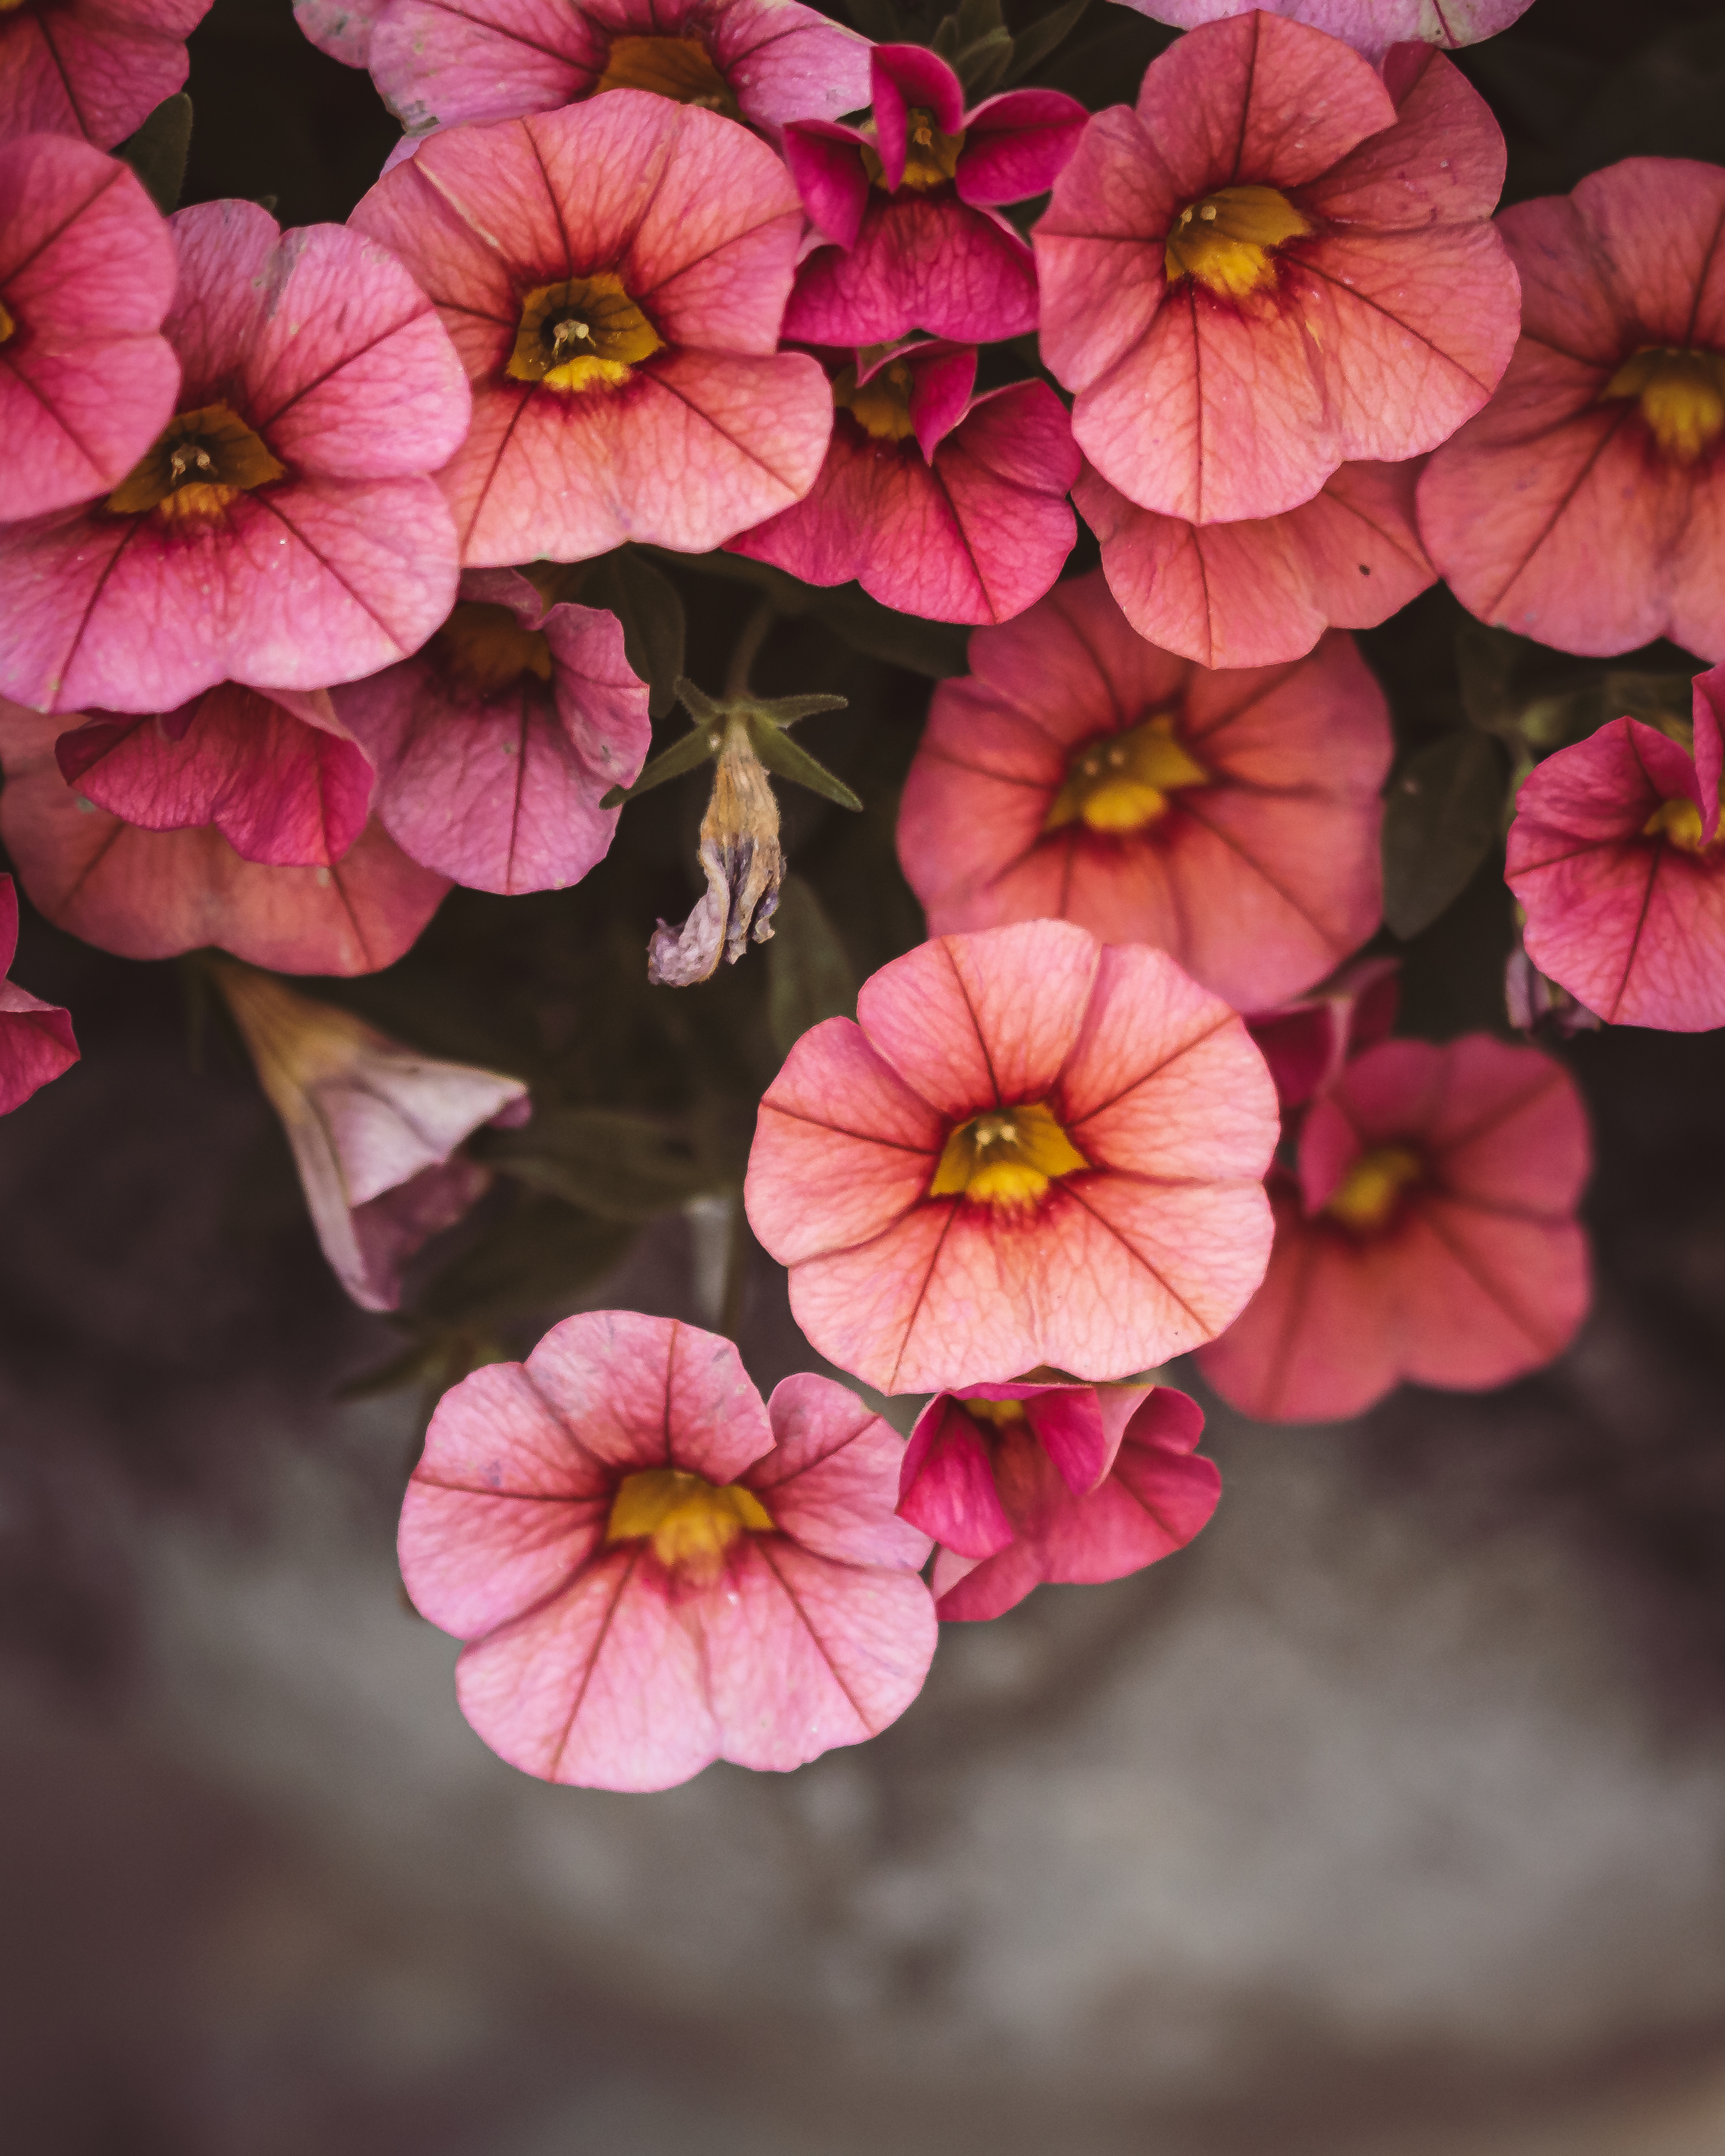 Flowering flowers, close-up, bloom, pink Free Stock Photos